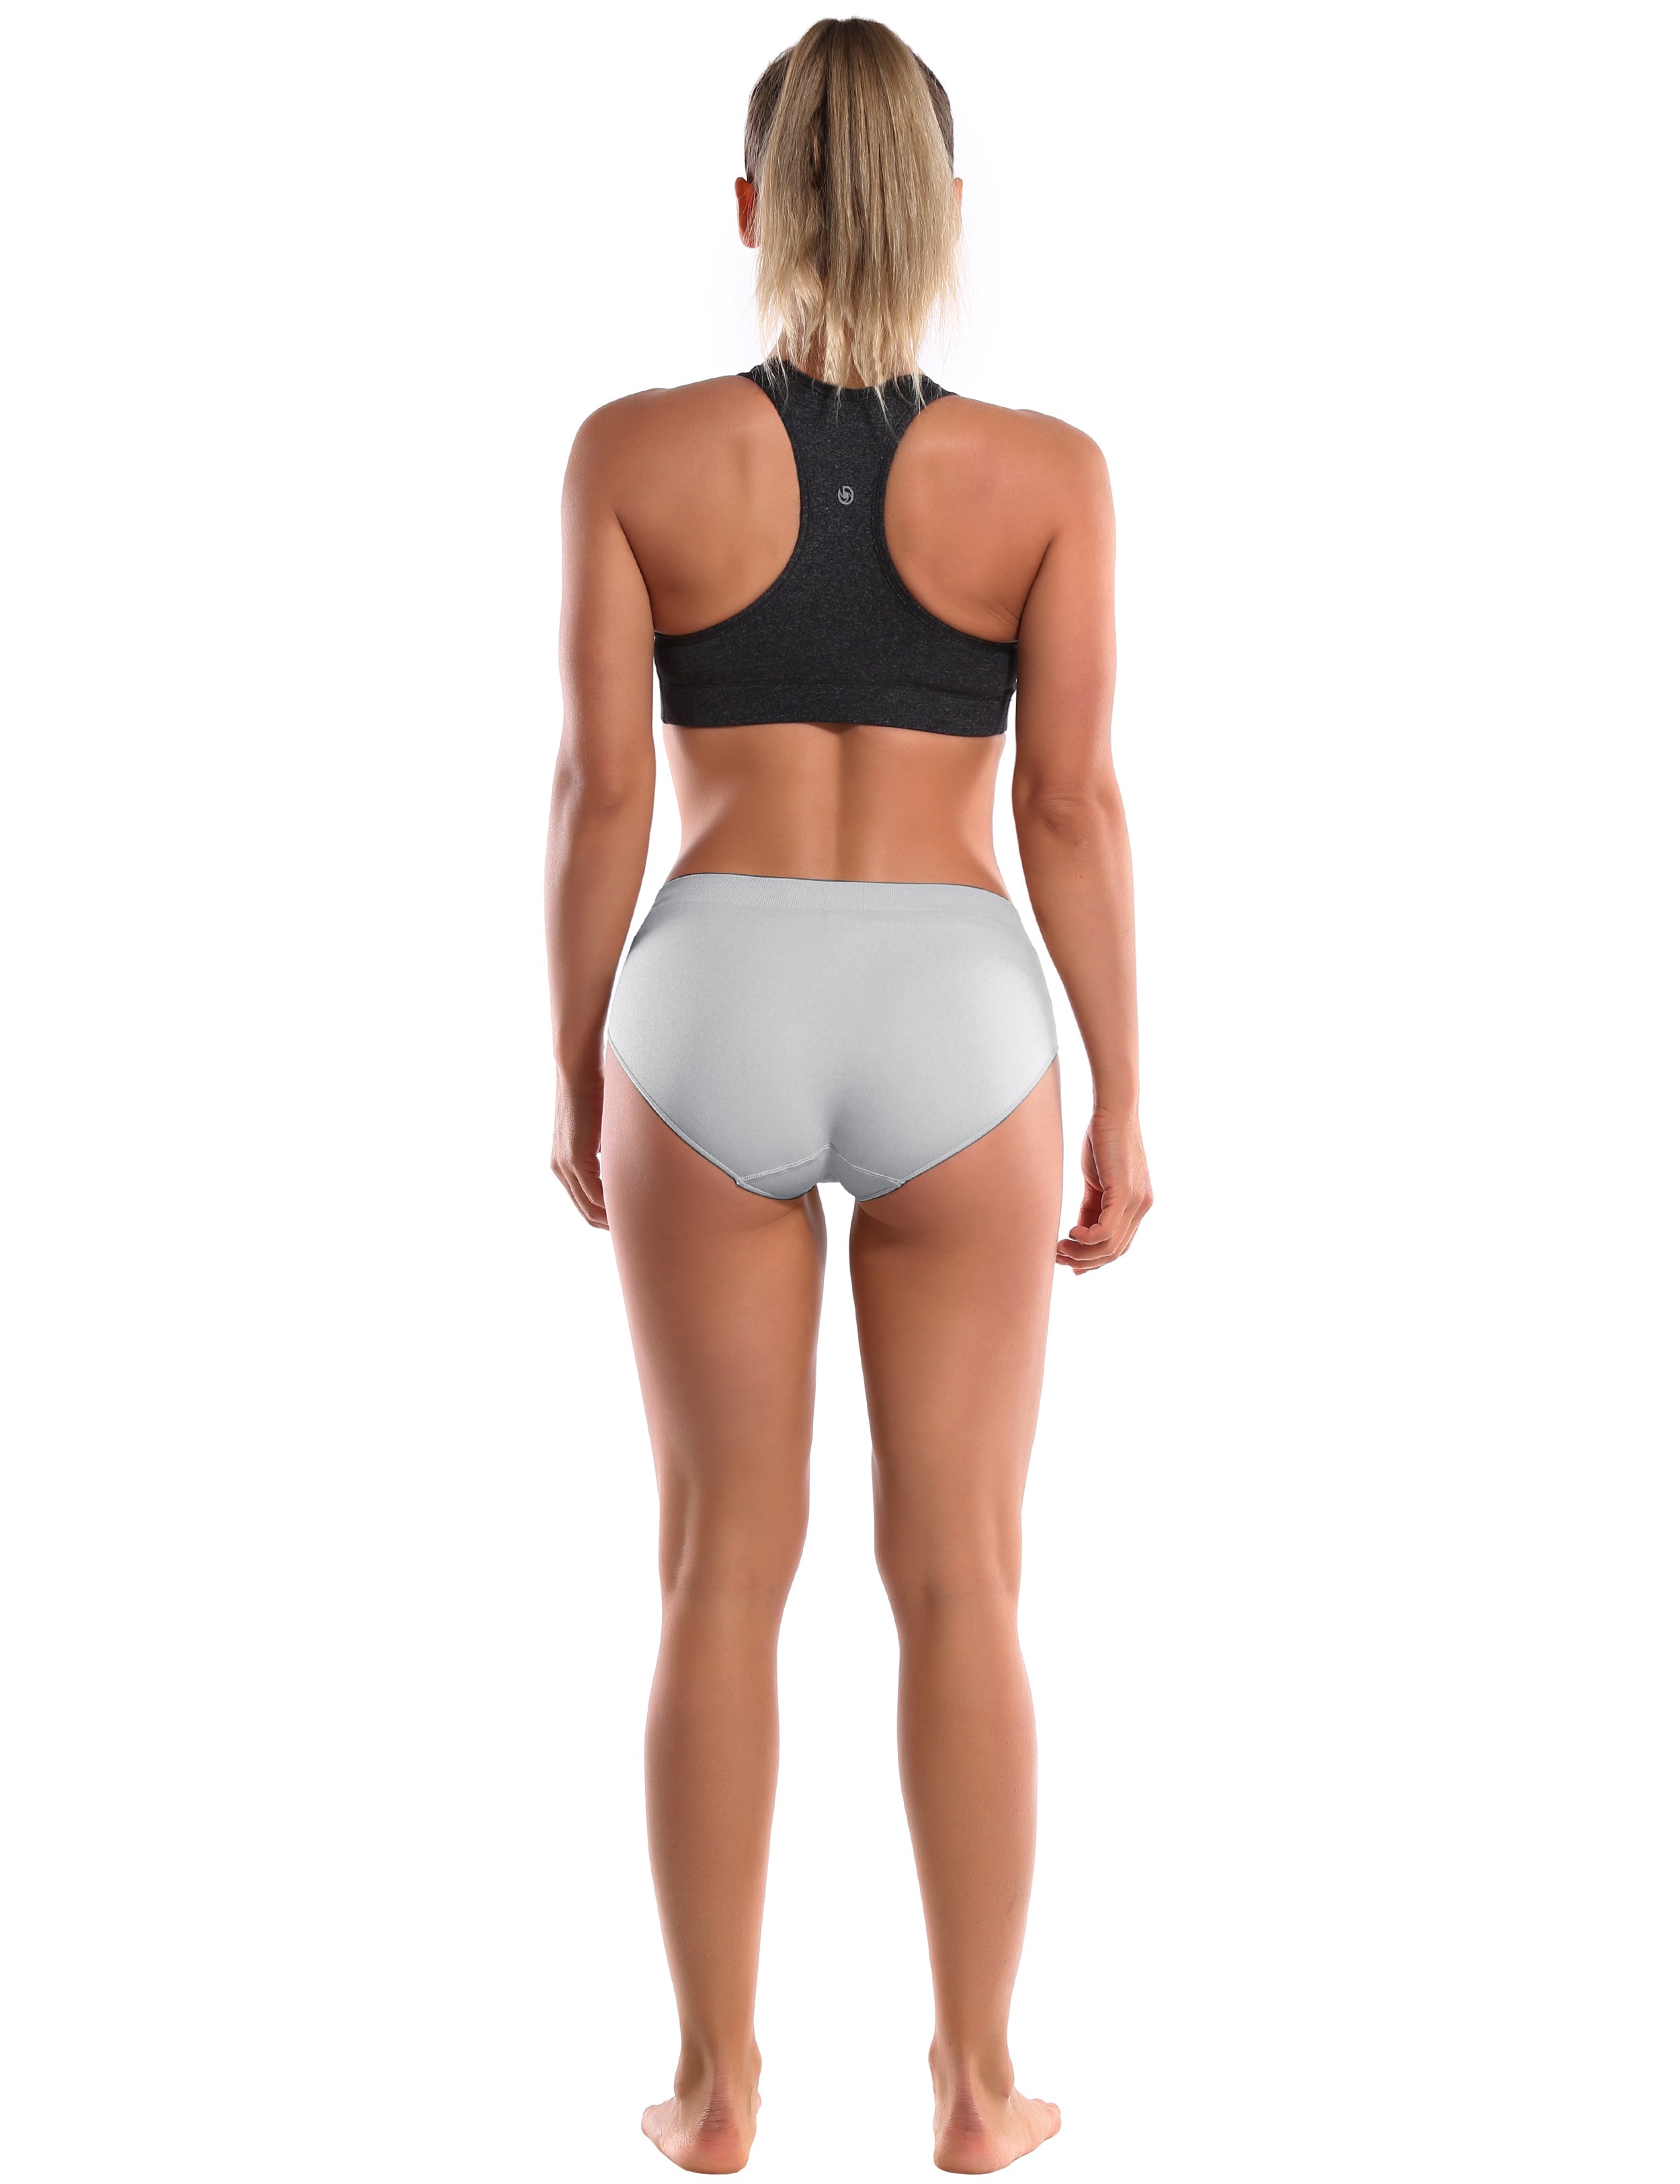 Seamless Sport Bikini Panties gray Sleek, smooth and streamlined: designed in our extra-soft knit material, this seamless thong embraces everyday comfort. Here with an allover heathered effect. Weave threads one by one High elasticity Softest-ever fabric Unsealed Comfortable No back coverage Machine wash.